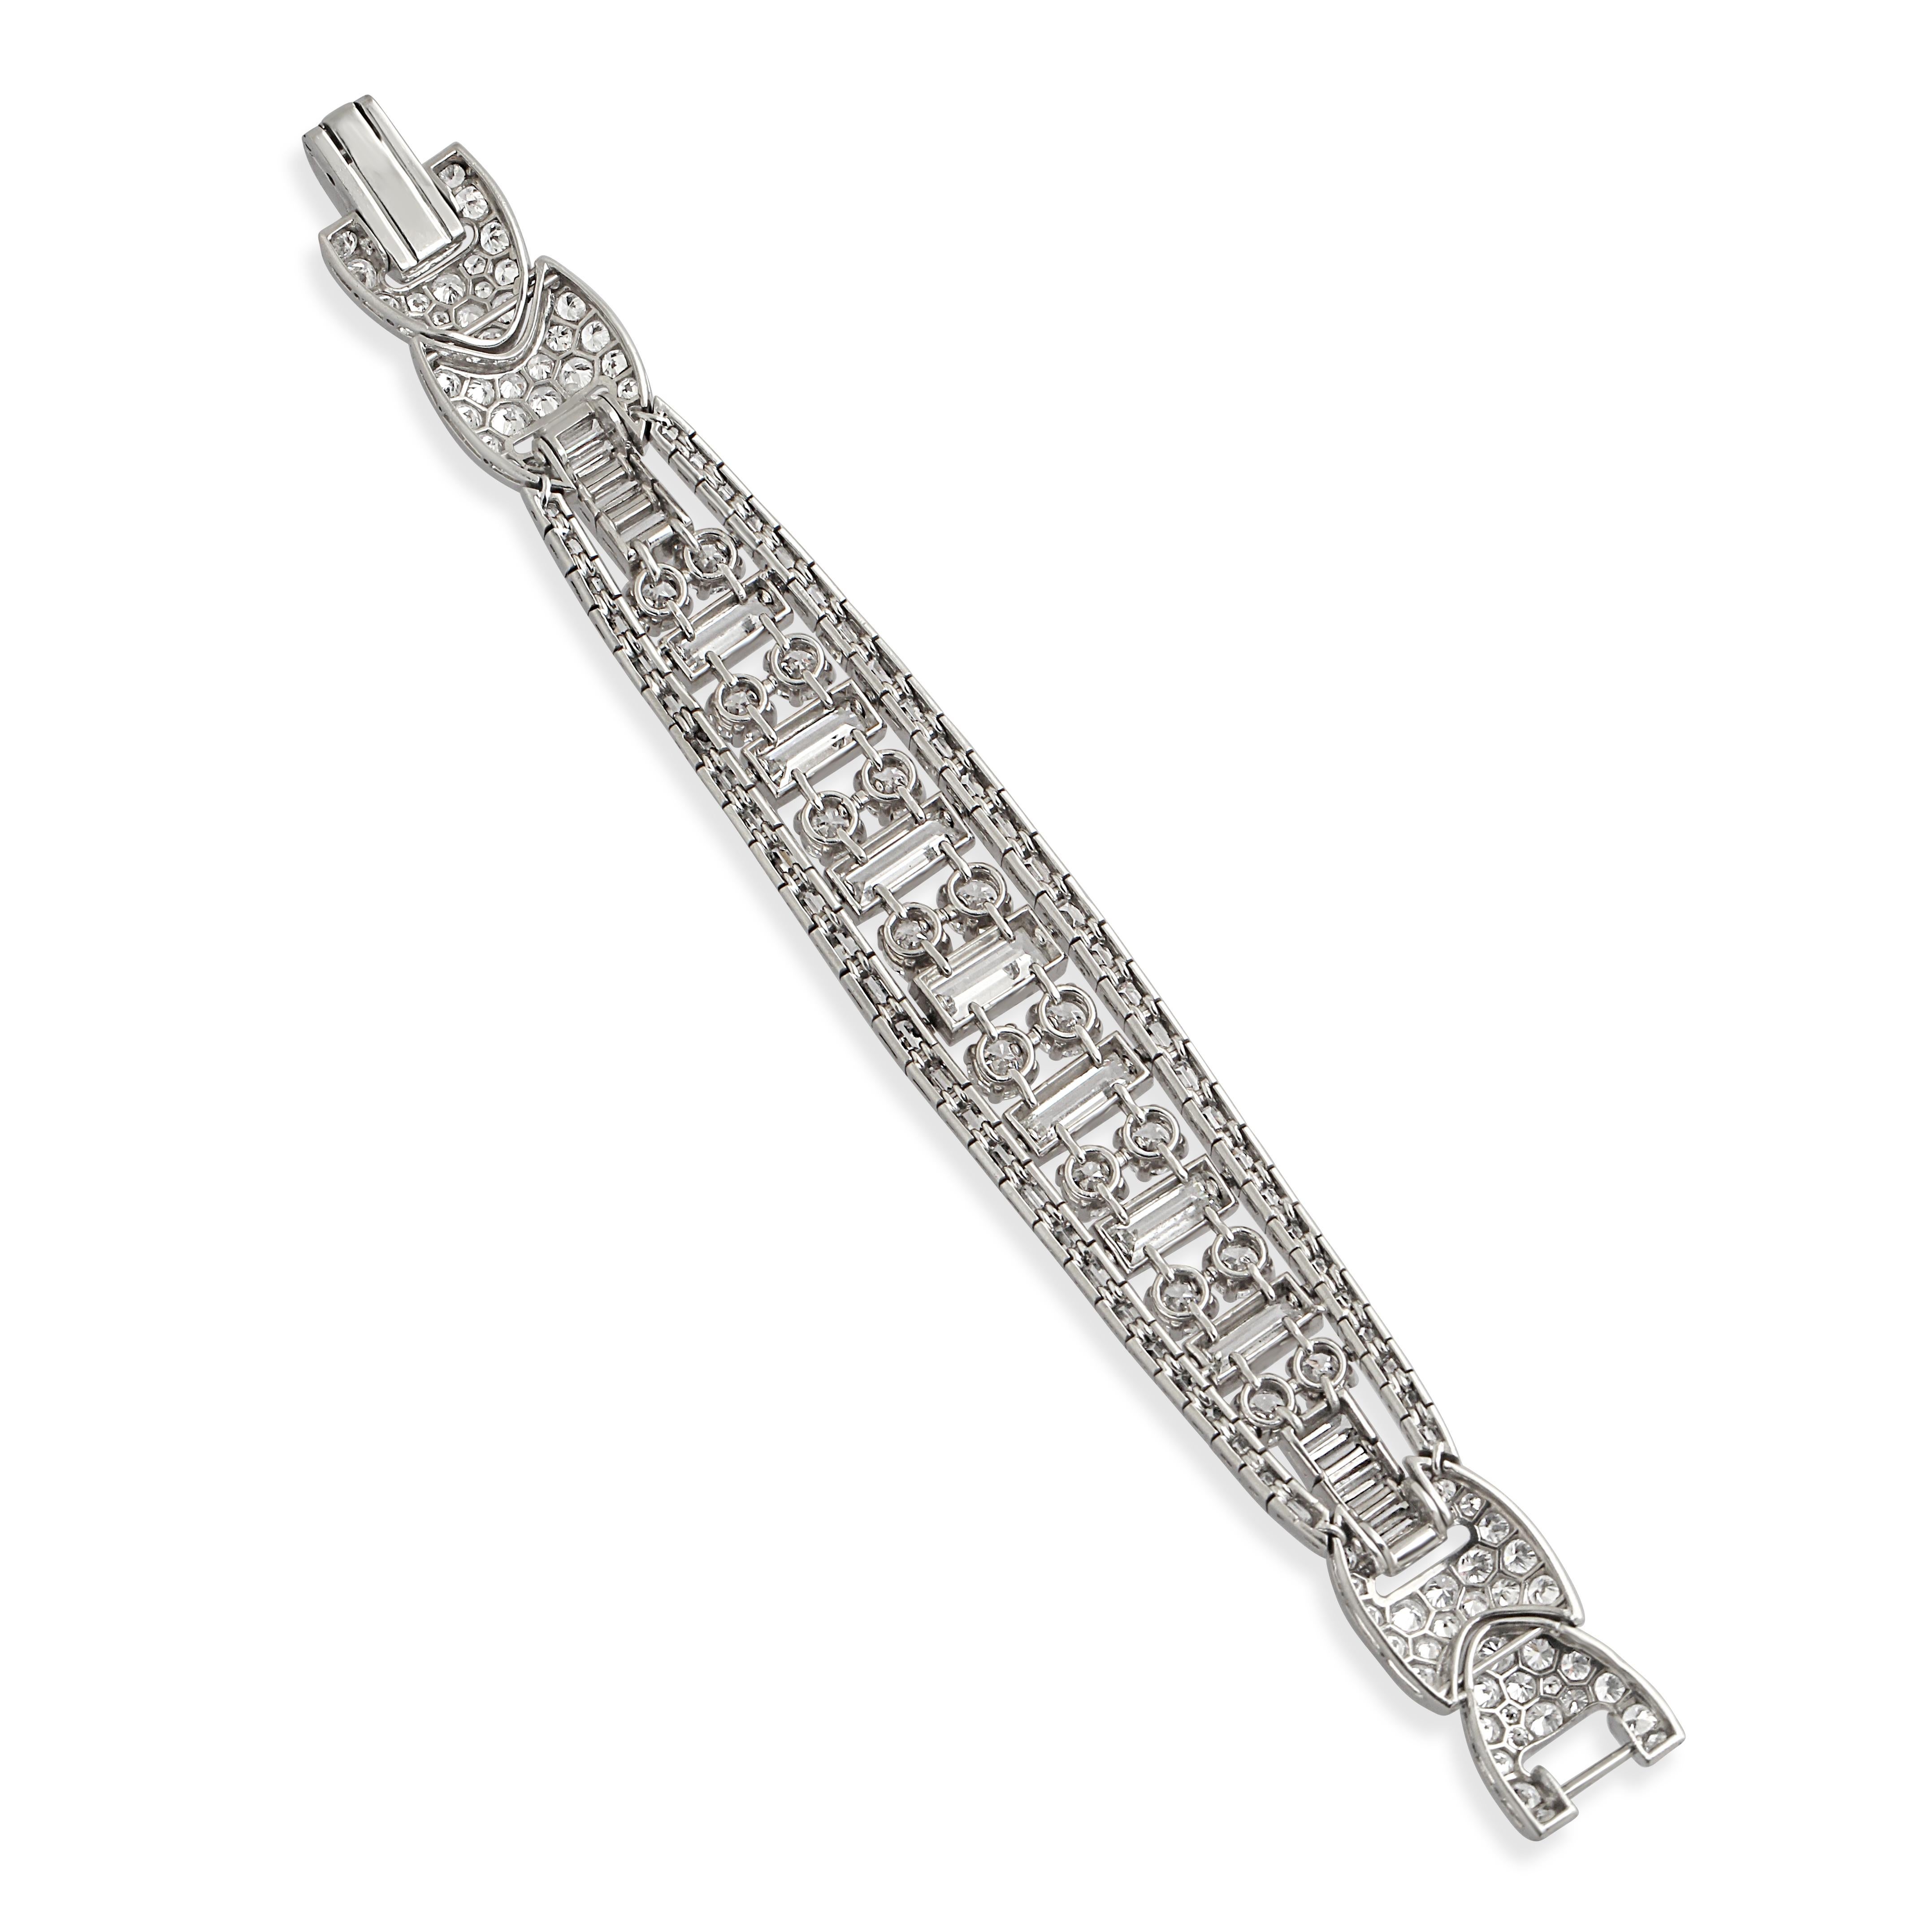 A 1950s platinum and diamond bracelet. Elegant and wonderfully articulated this mid century bracelet is set with approximately 8.00 carats of round-cut diamonds surrounded by additional baguette-cut and pavé-set diamonds.

Price available on request.